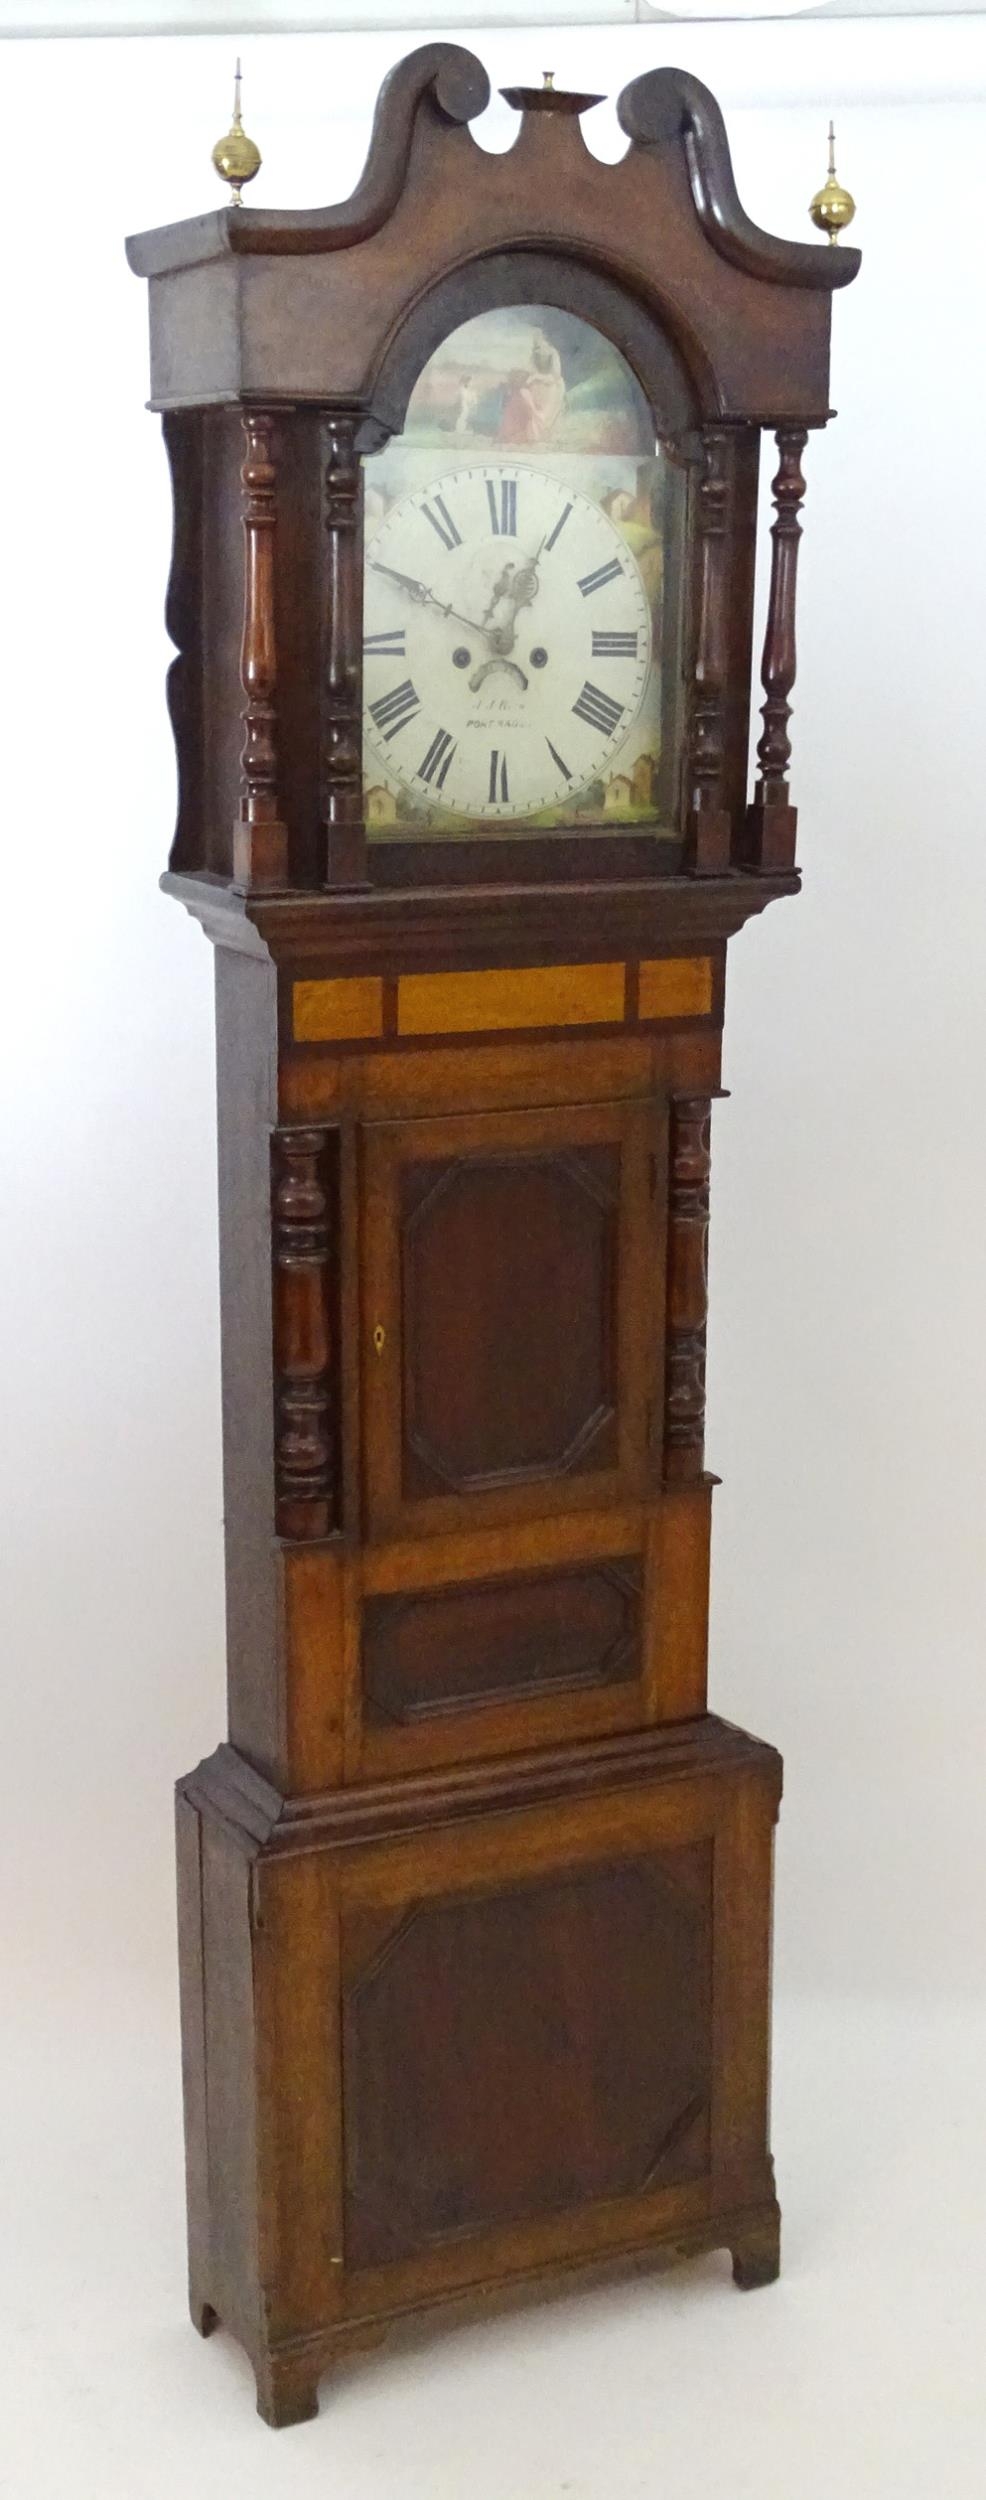 J J Rees Port Madoc : A Welsh Victorian longcase clock with 14" painted dial and 8-day movement. The - Image 3 of 14